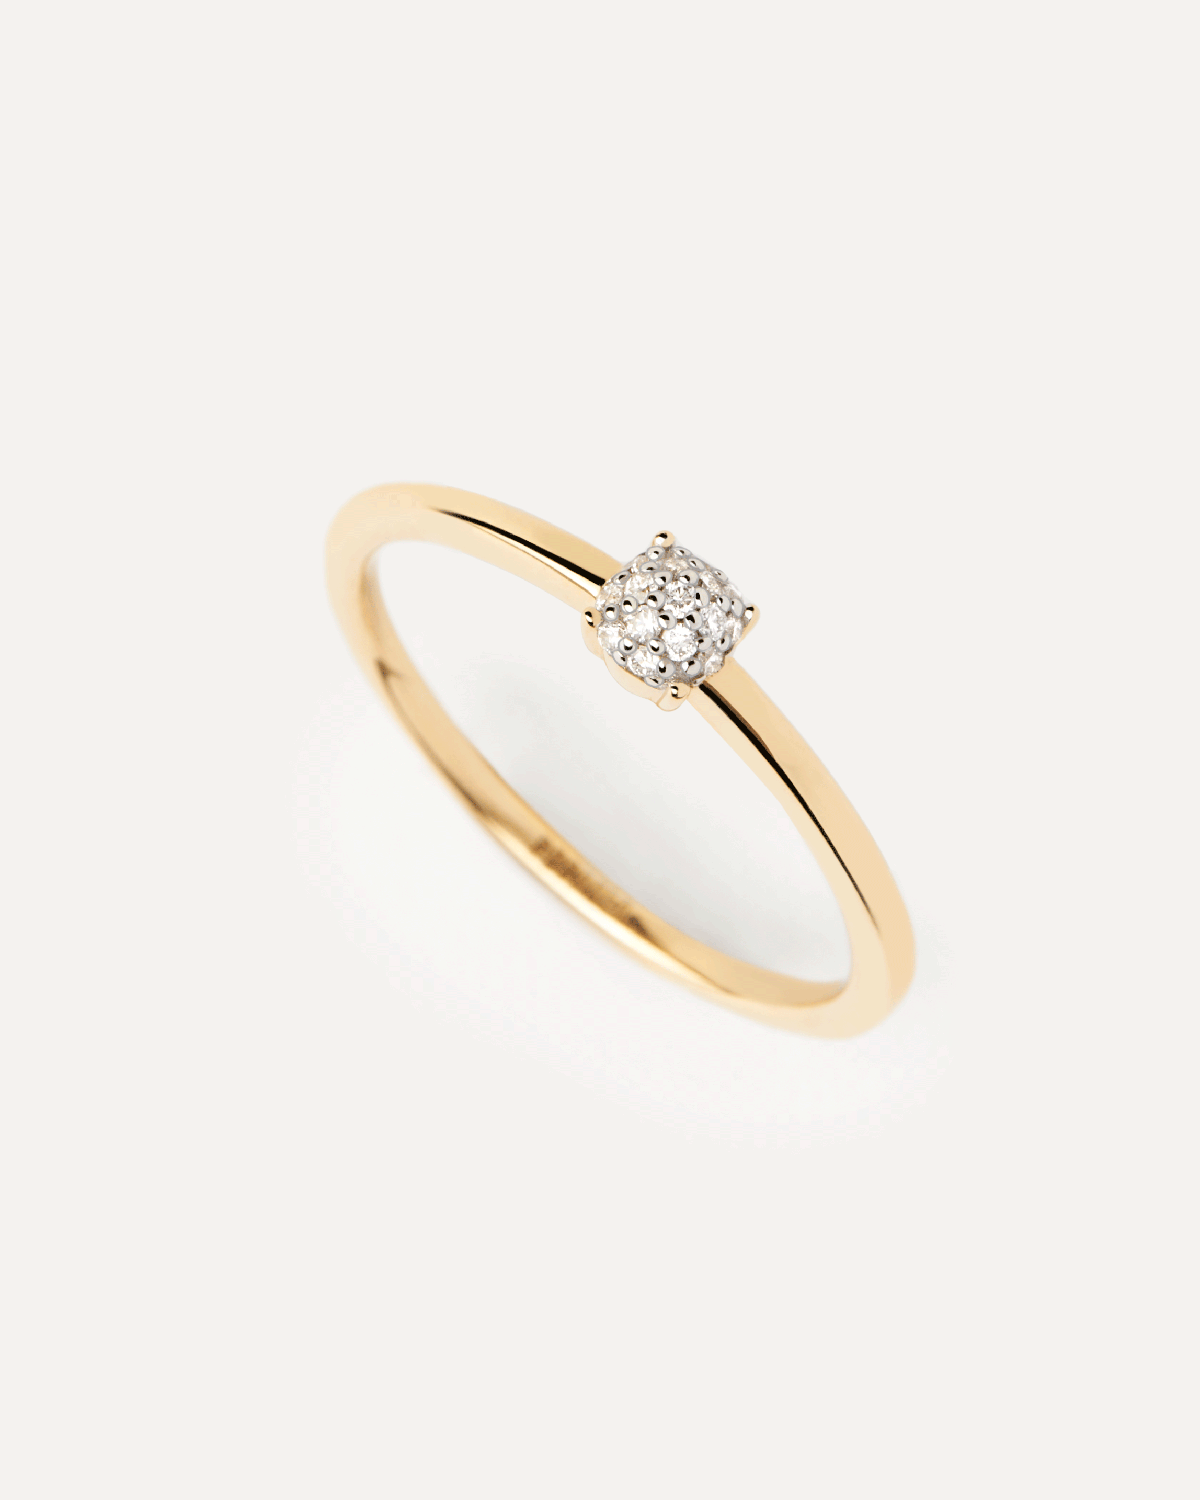 Diamonds and gold Dona solitary ring. Slim round solitary ring in solid 18K yellow gold set with pavé lab-grown diamonds. Get the latest arrival from PDPAOLA. Place your order safely and get this Best Seller.